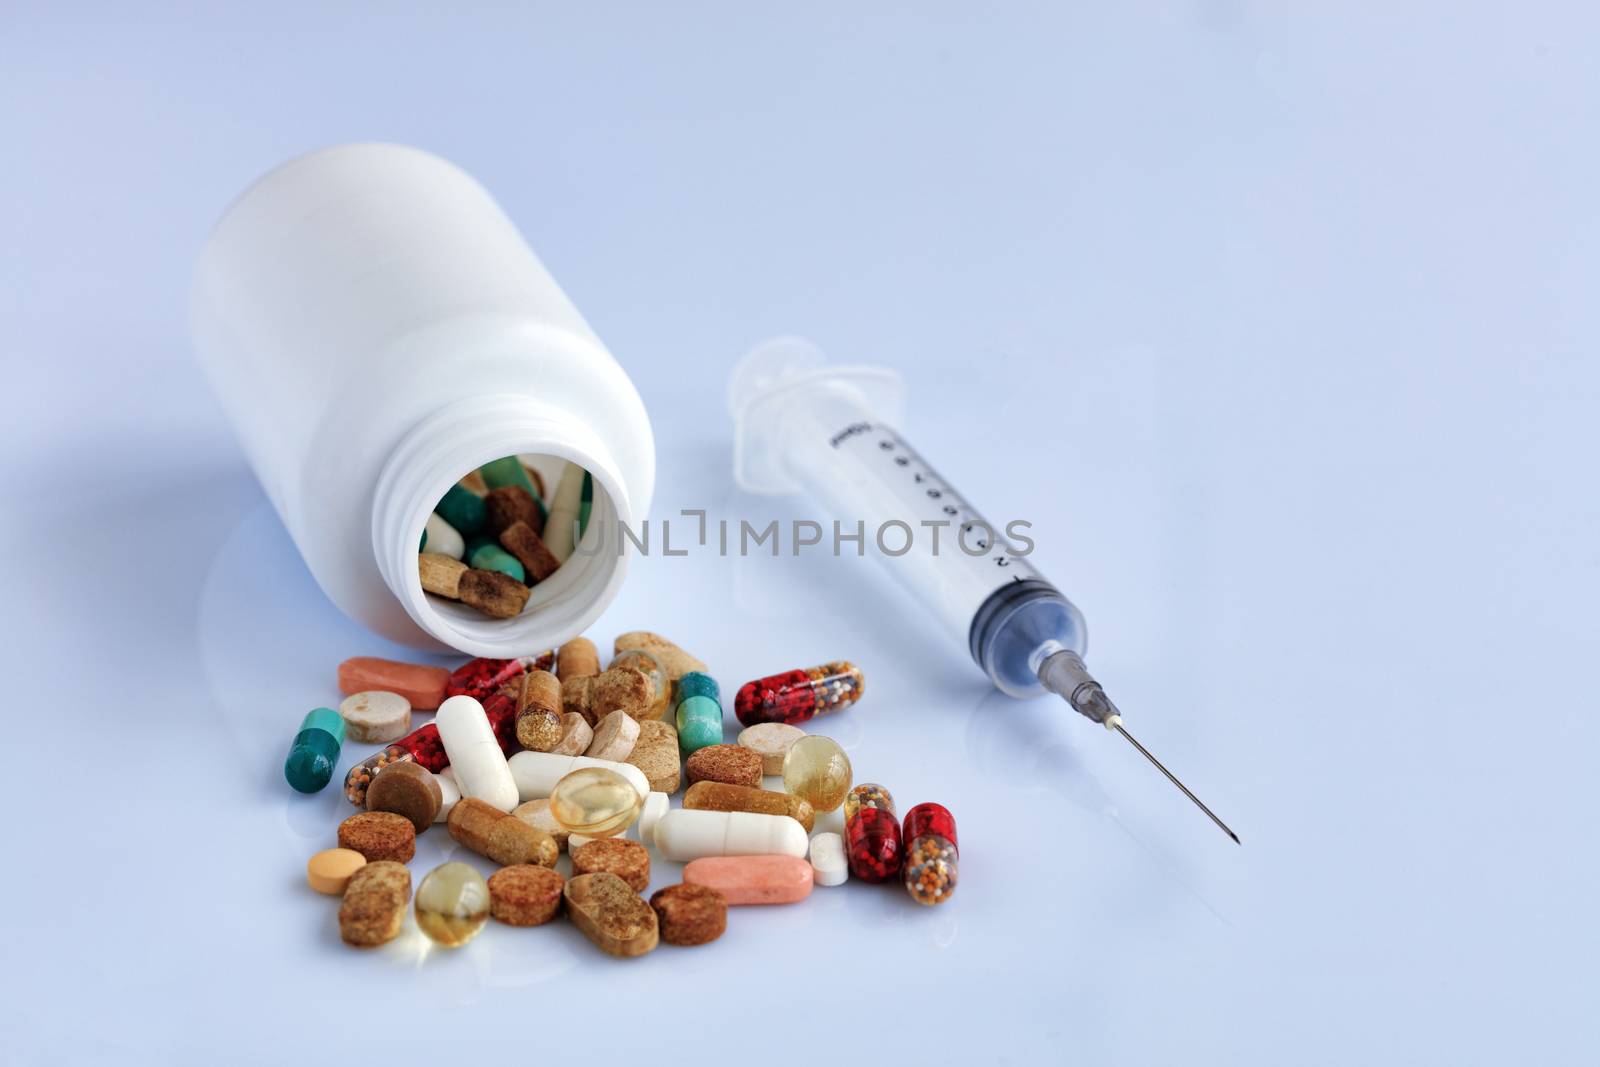 Tablets and capsules are scattered from a white bottle on a white smooth table near a disposable syringe.